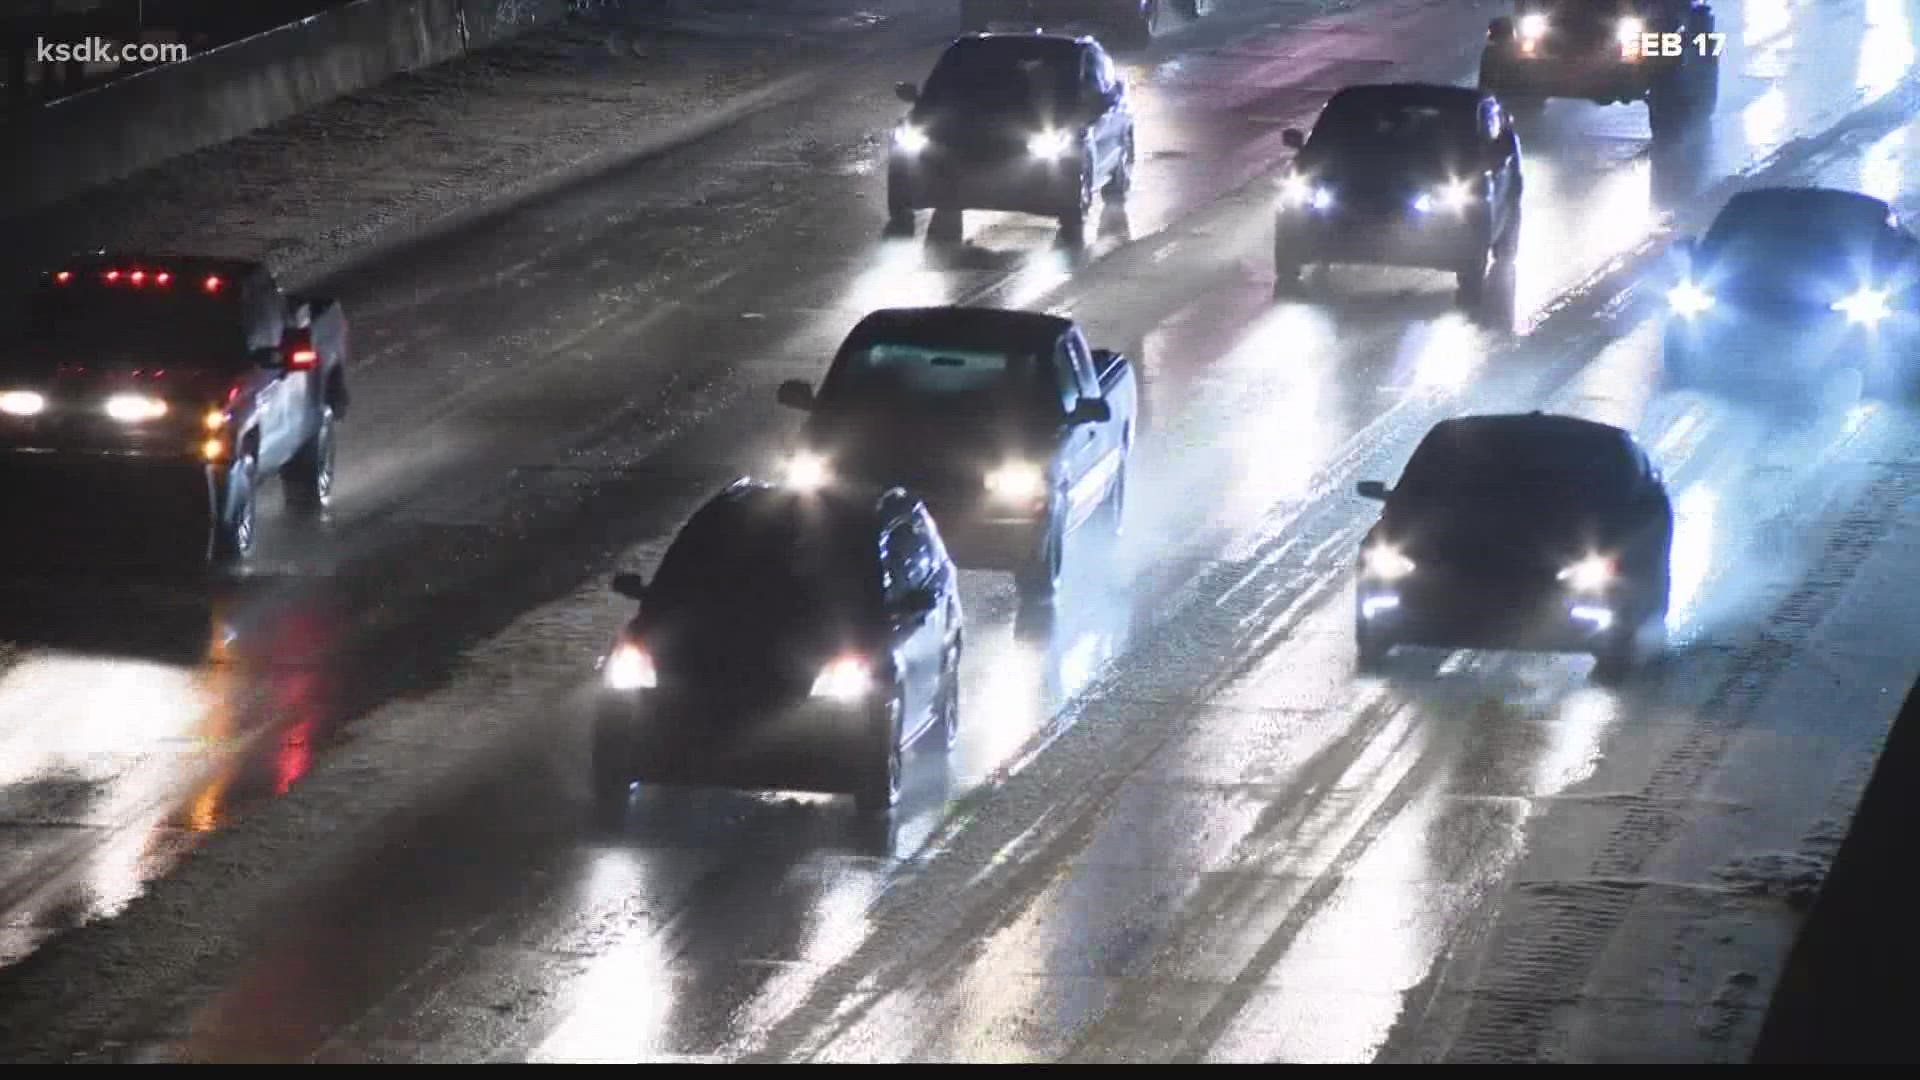 As with other recent waves of winter weather, MoDOT is asking drivers to be careful on the roads when the weather hits. People are asked to avoid rush hour.